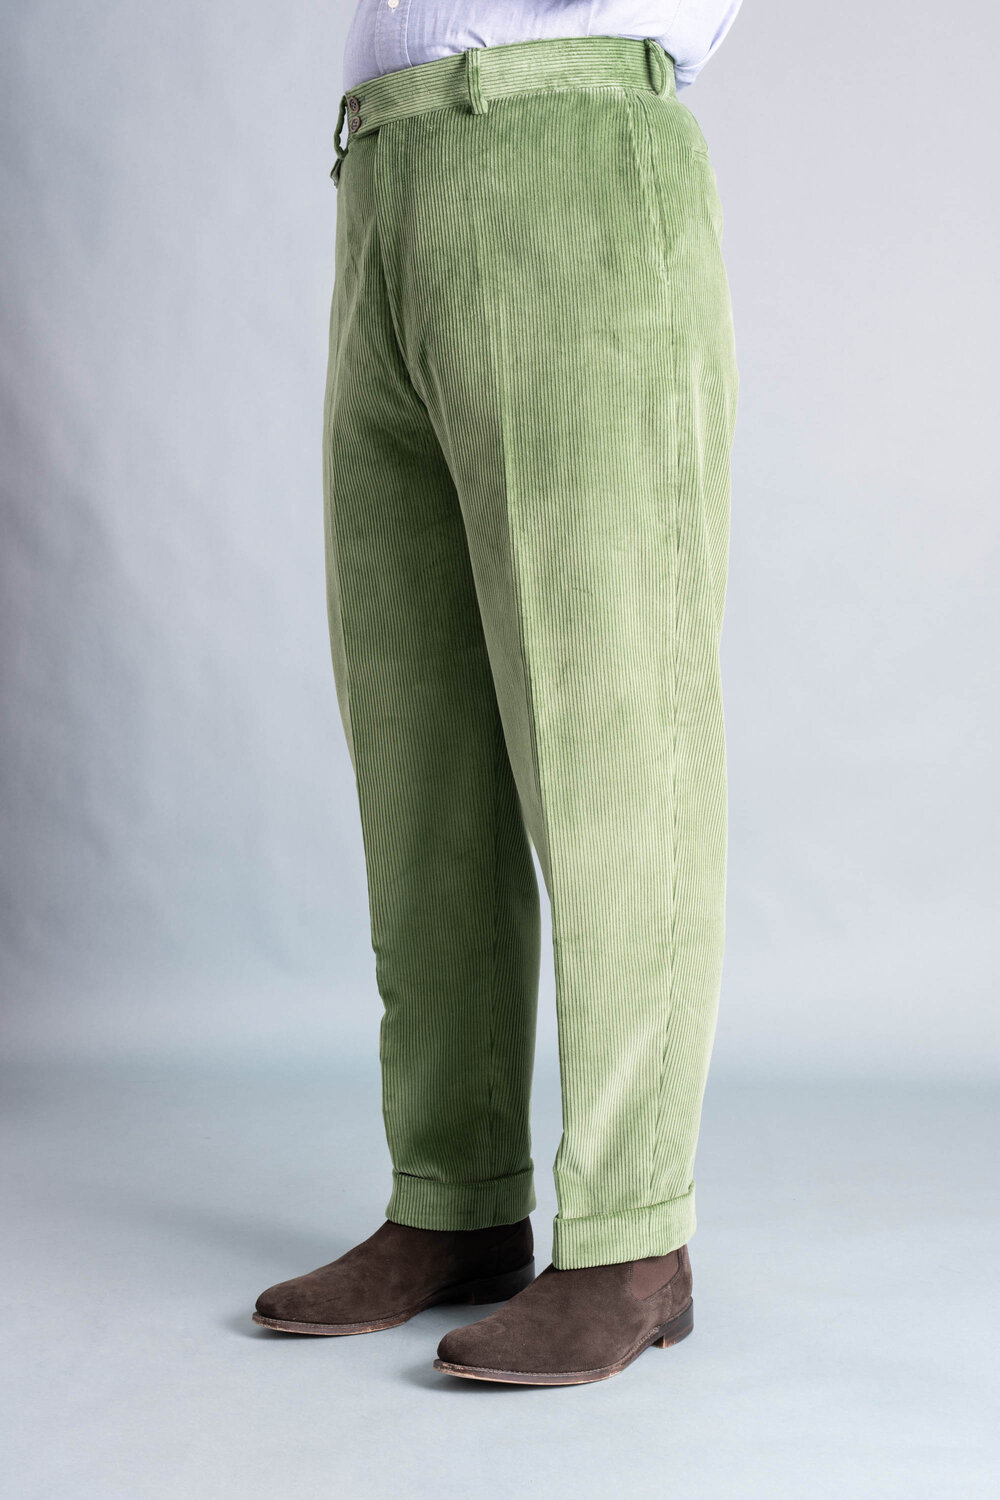 Sage Green Corduroy Trousers, Men's Country Clothing